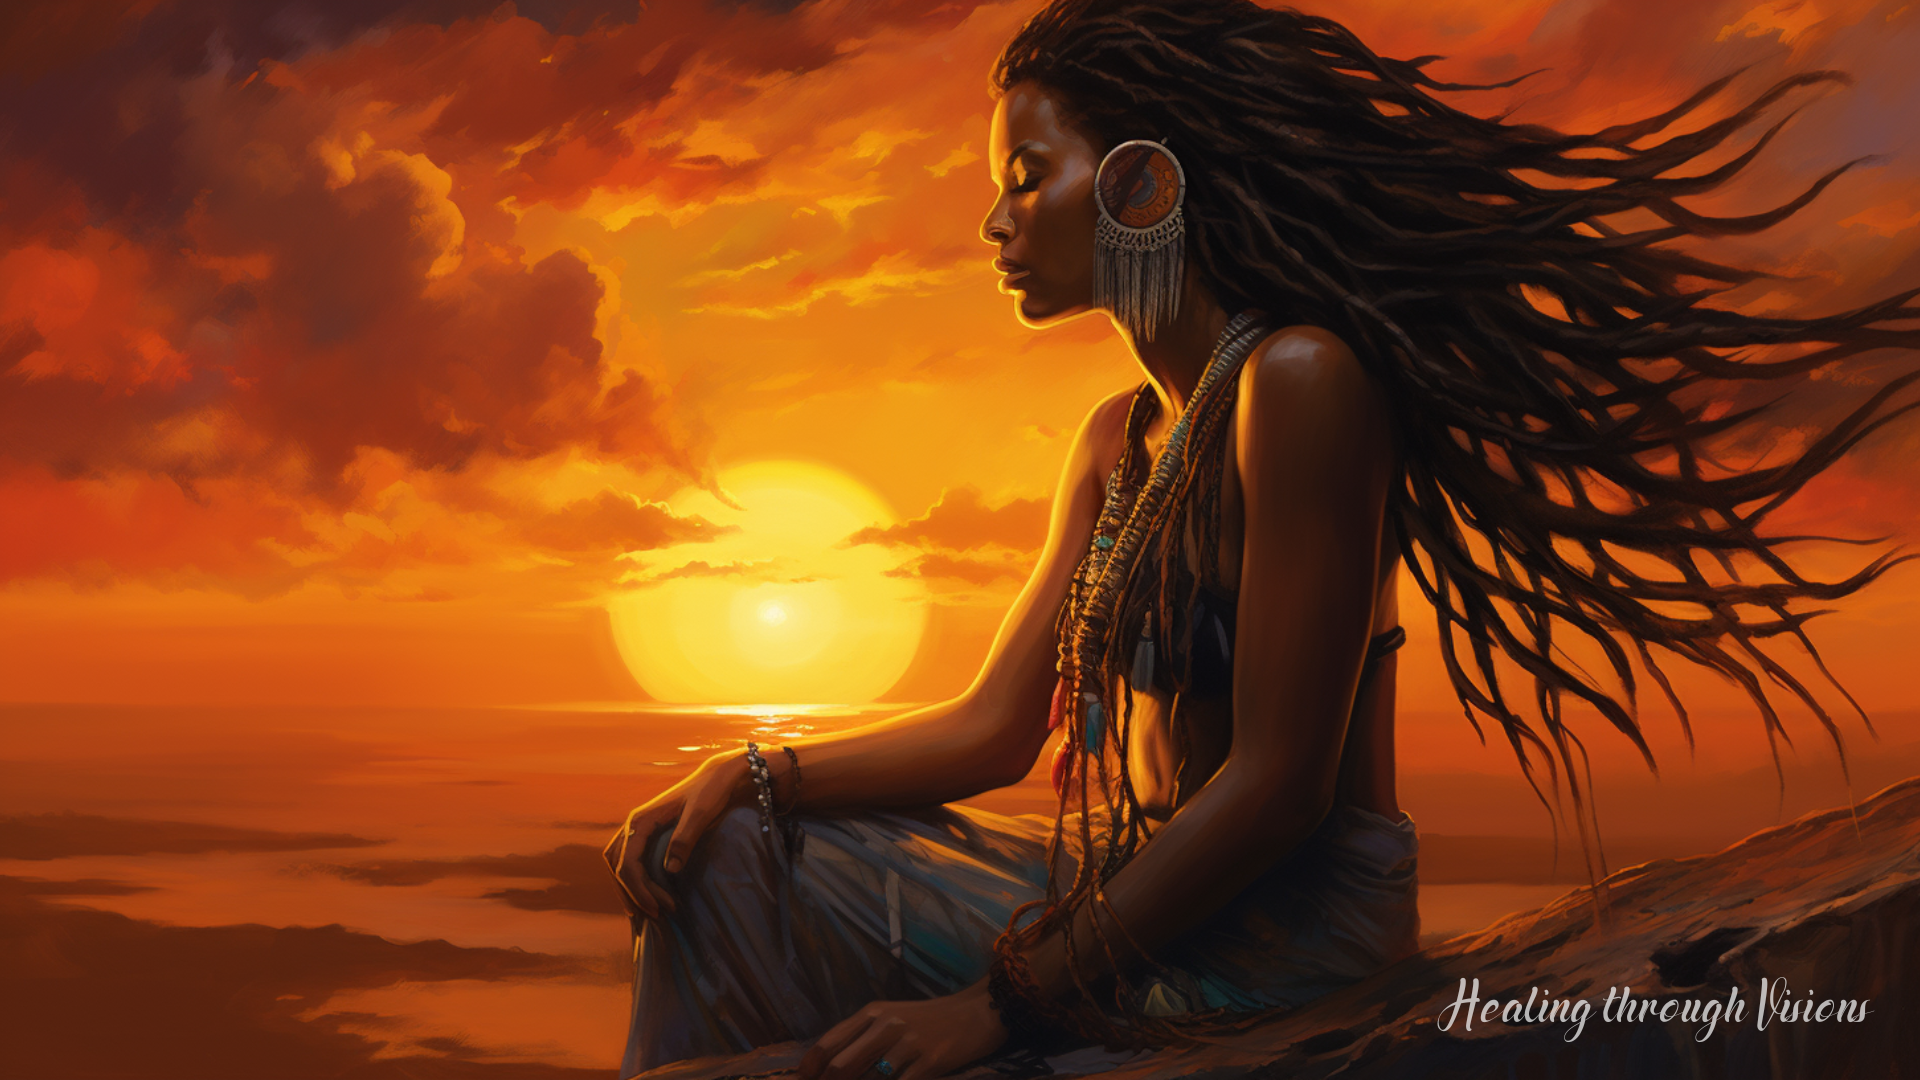 In the golden hour's gentle glow, an indigenous shaman woman with flowing locs prepares libations for her ancestors at an intricately adorned altar. With grace and intention, she pours offerings, uniting the earthly and the divine, embodying the living bridge between generations with profound reverence and love.